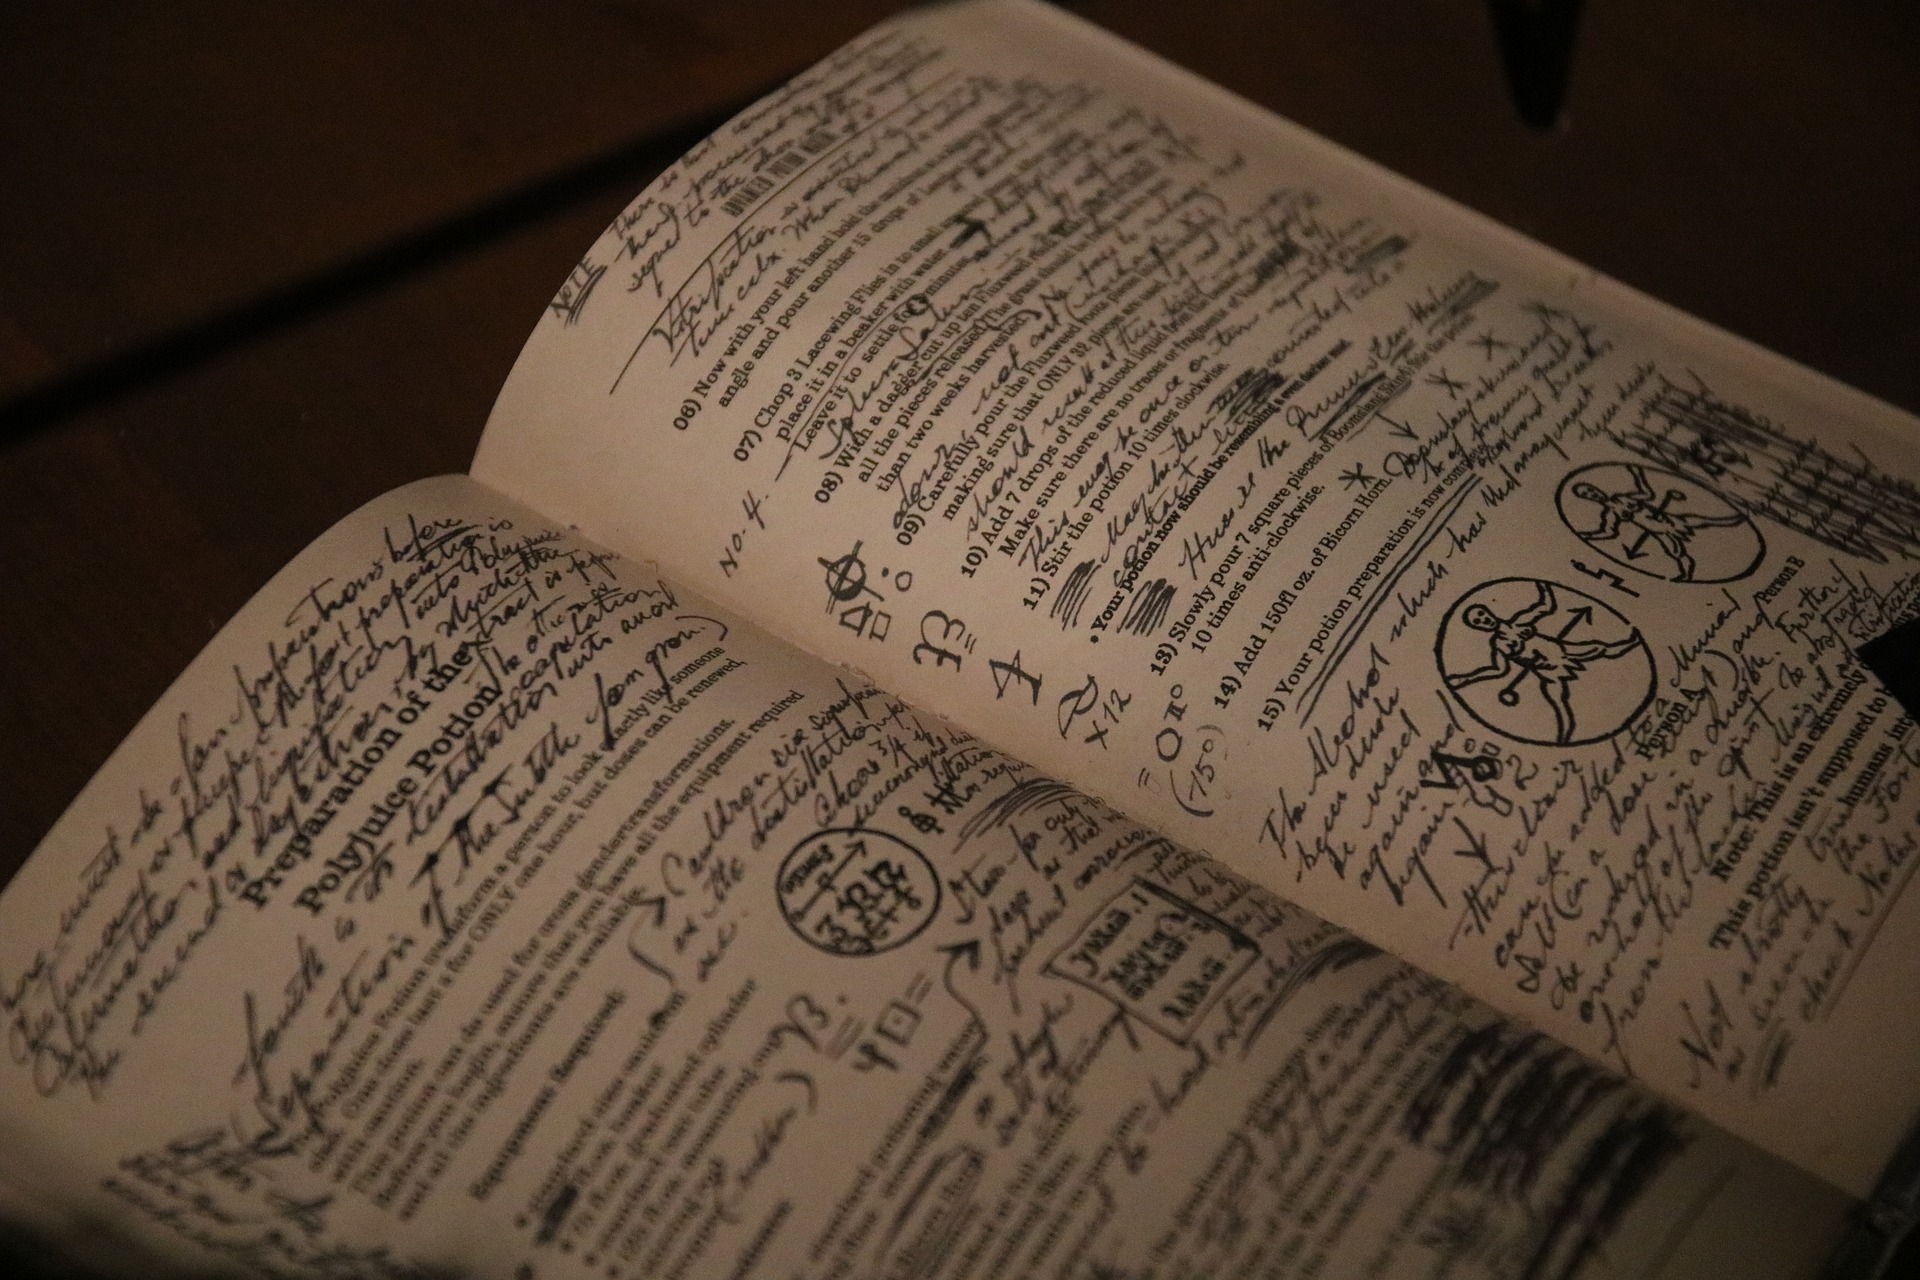 Open spellbook with hand-written notes and diagrams across the page